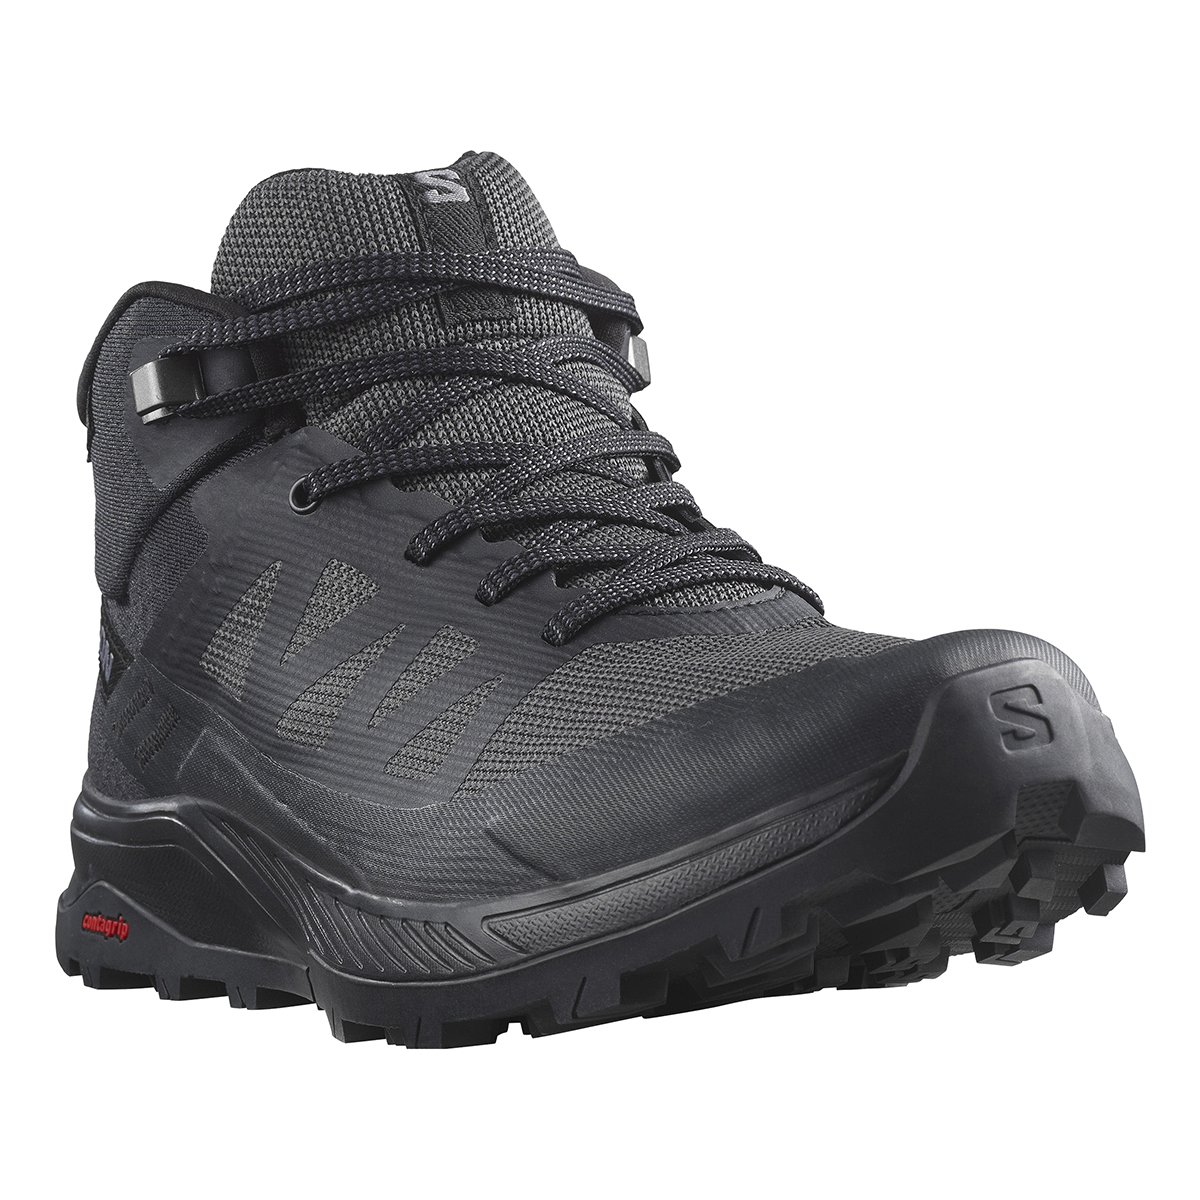 OUTRISE MID GORE-TEX W